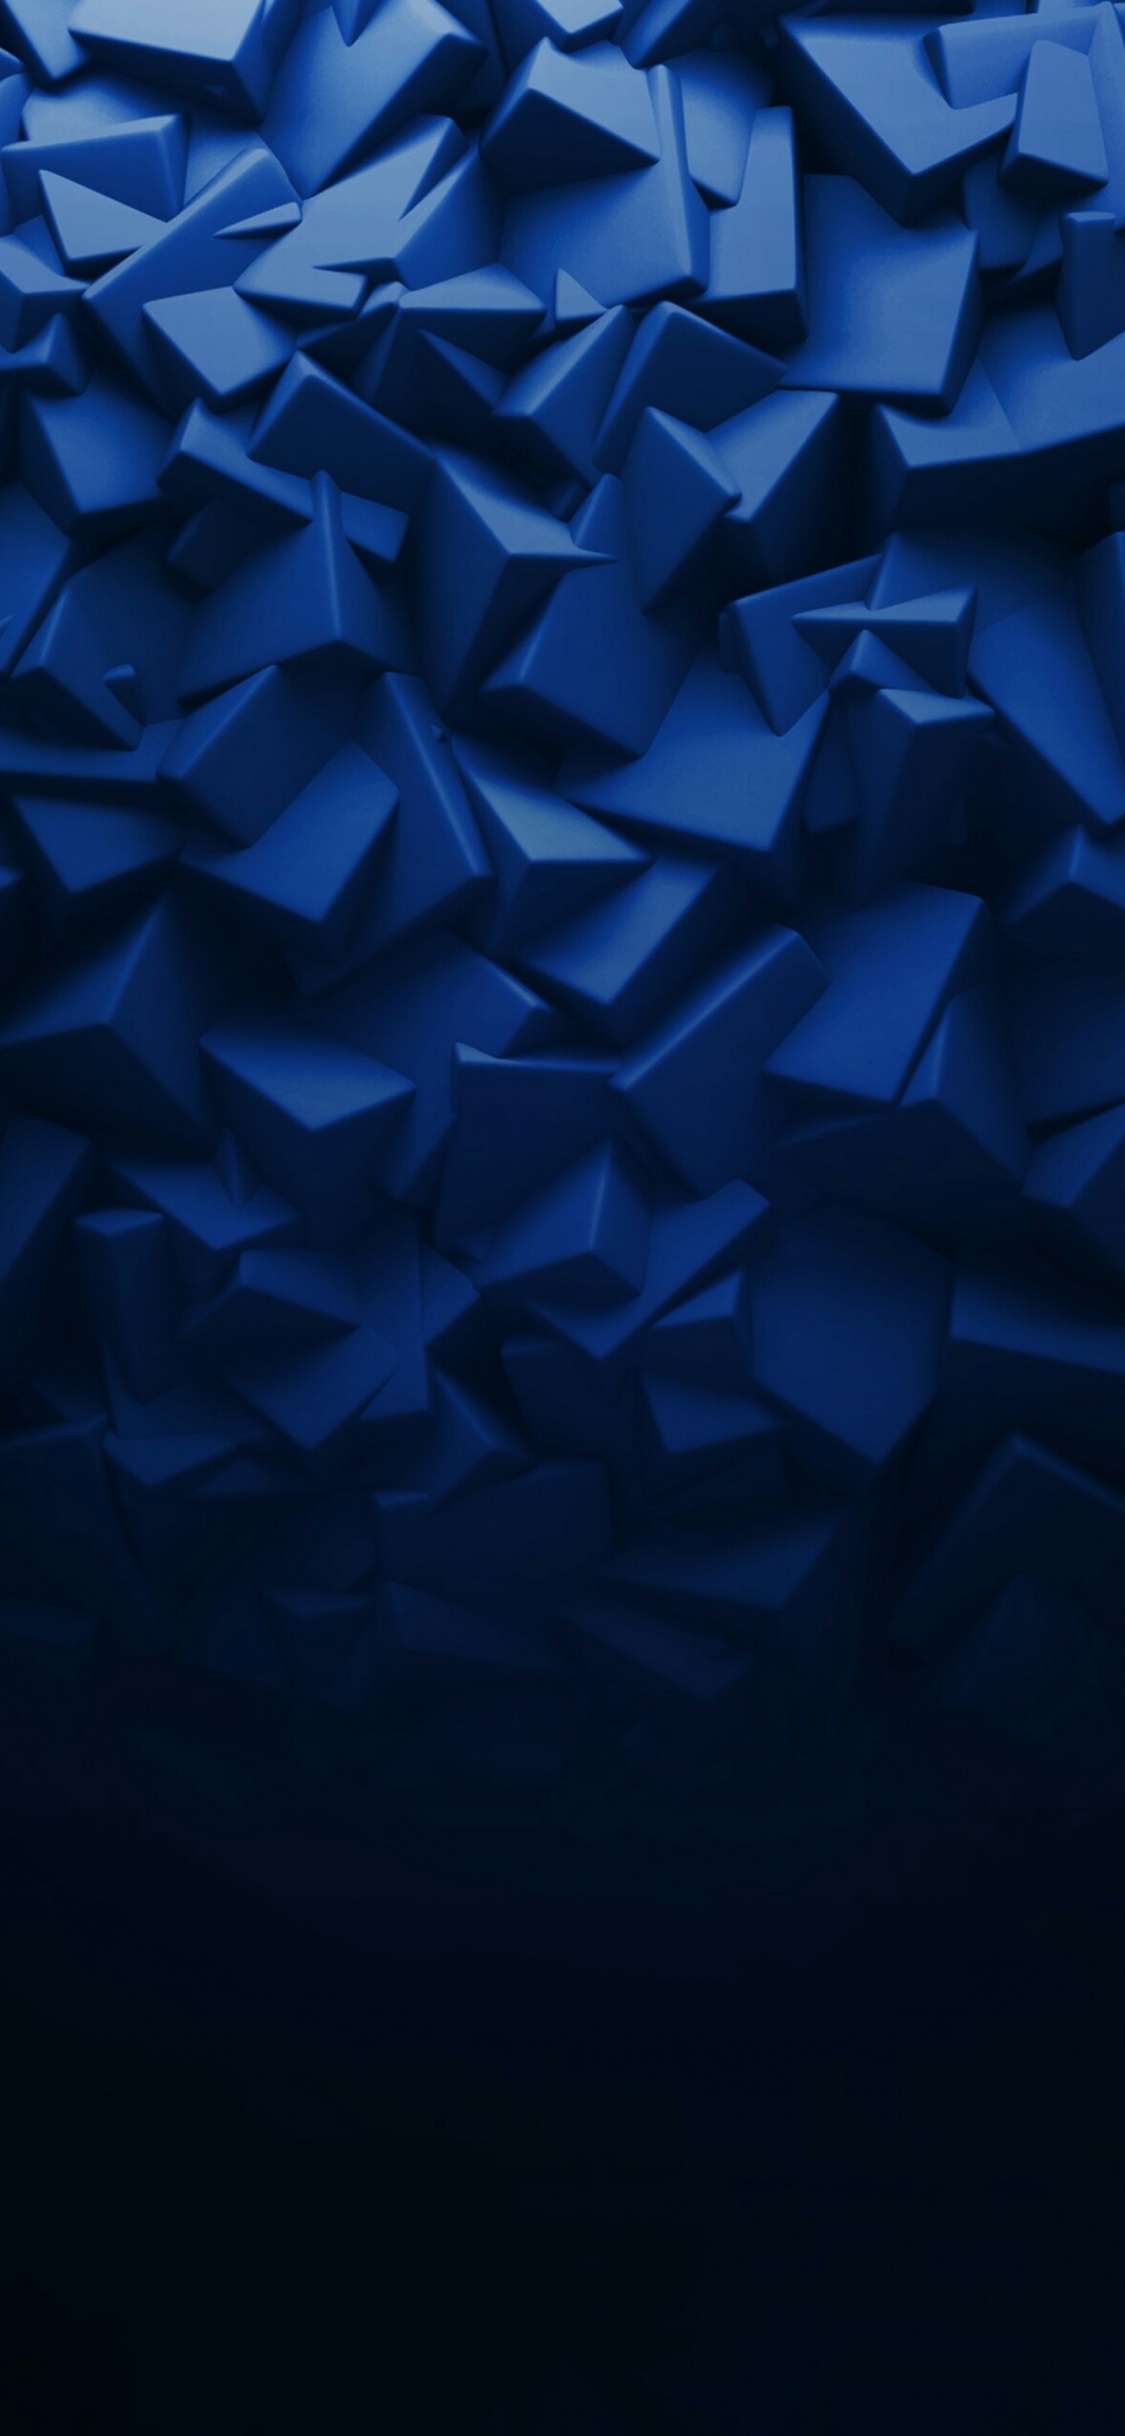 Blue and White Star Illustration. Wallpaper in 1125x2436 Resolution